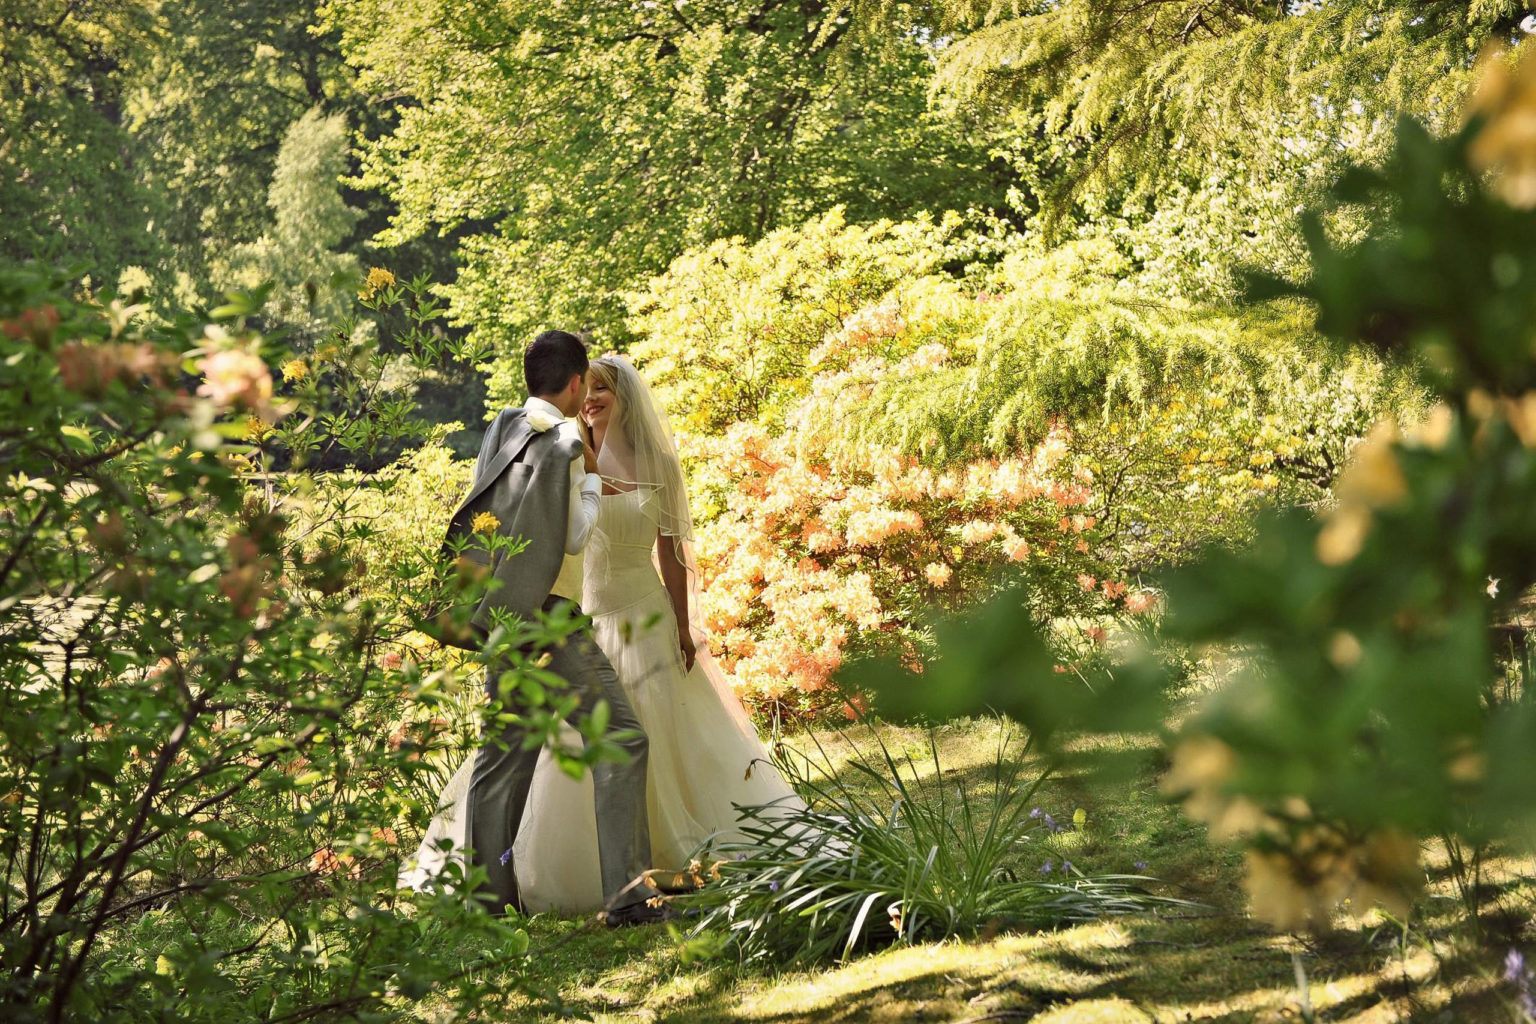 A bride and groom standing among trees in Swinton Estate parkland gardens